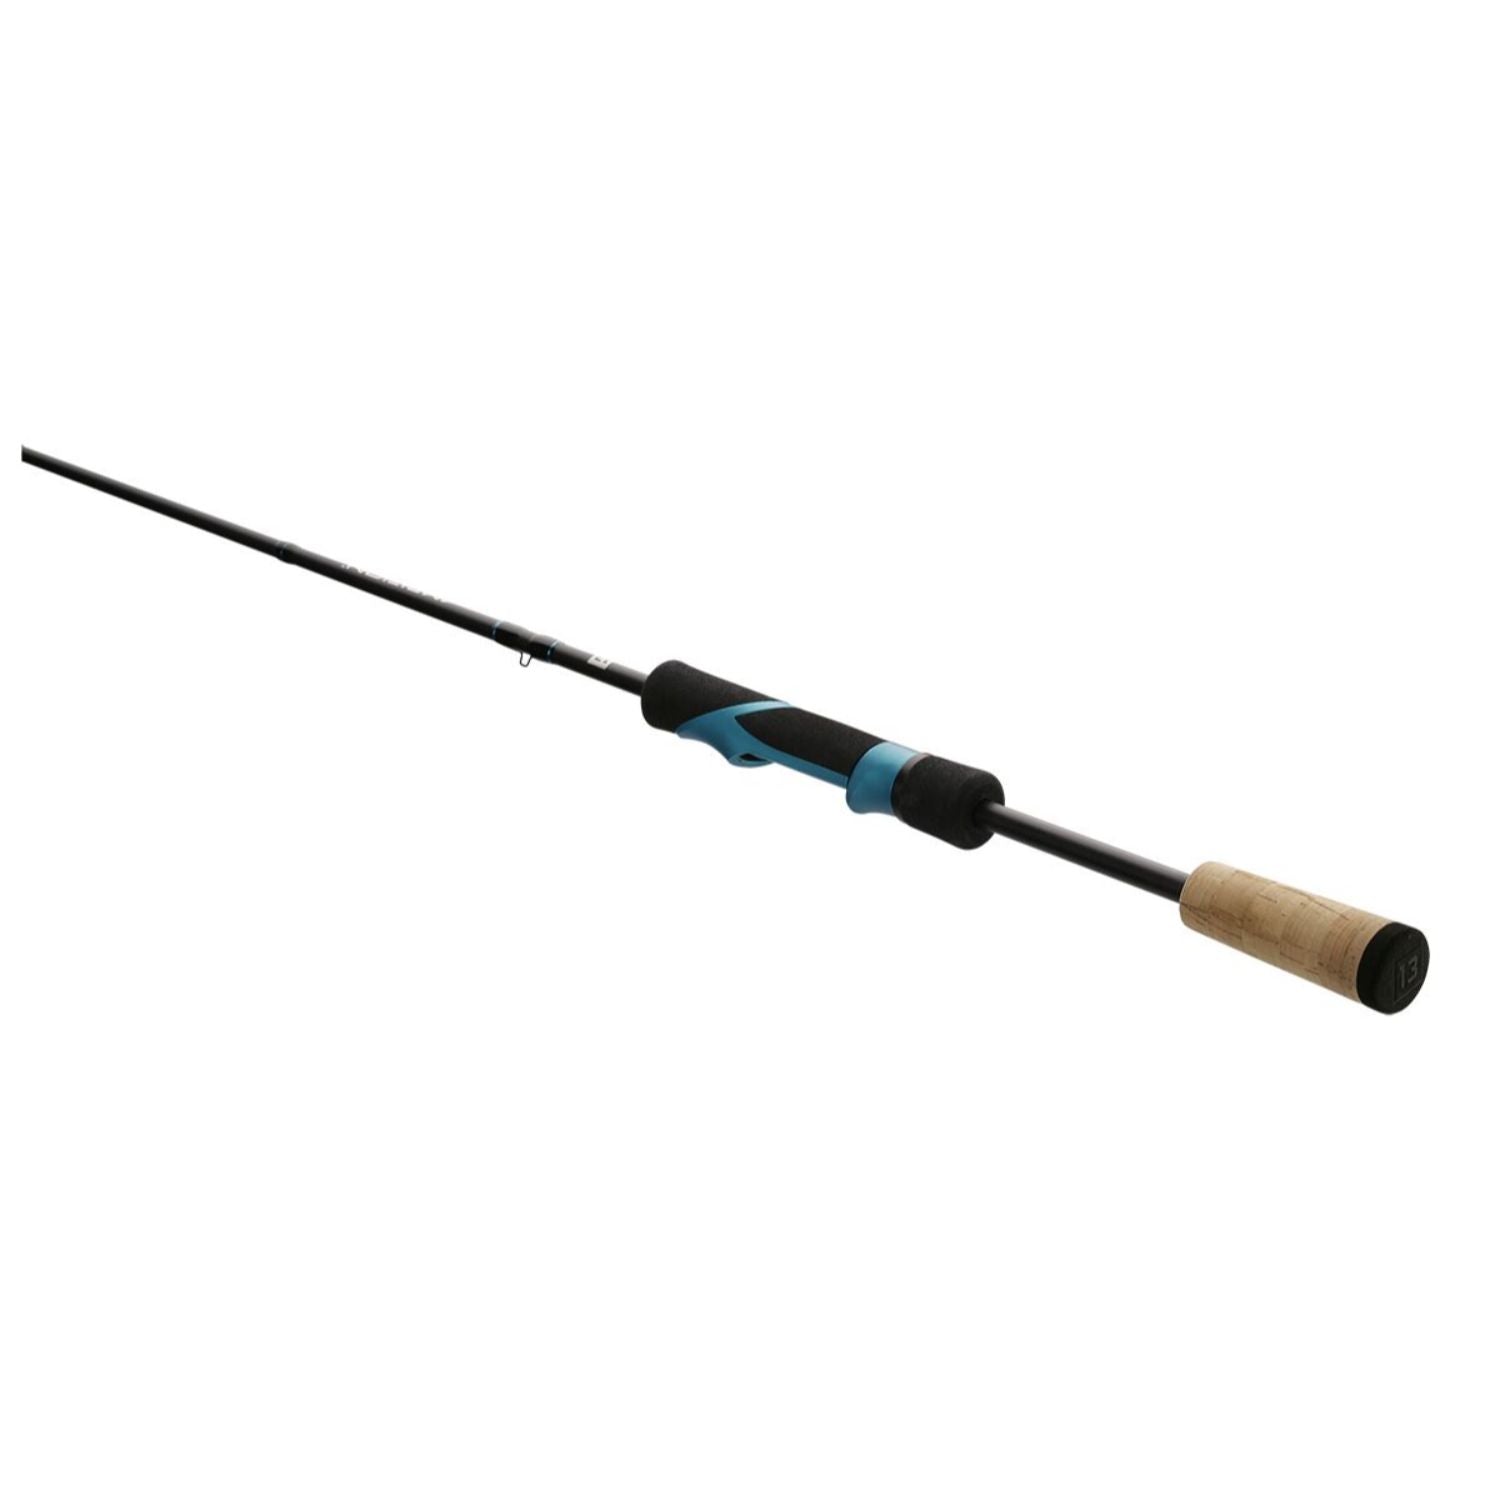 Blackout 13 Fishing 7ft 1inch M Spinning Rod from Fish On Outlet